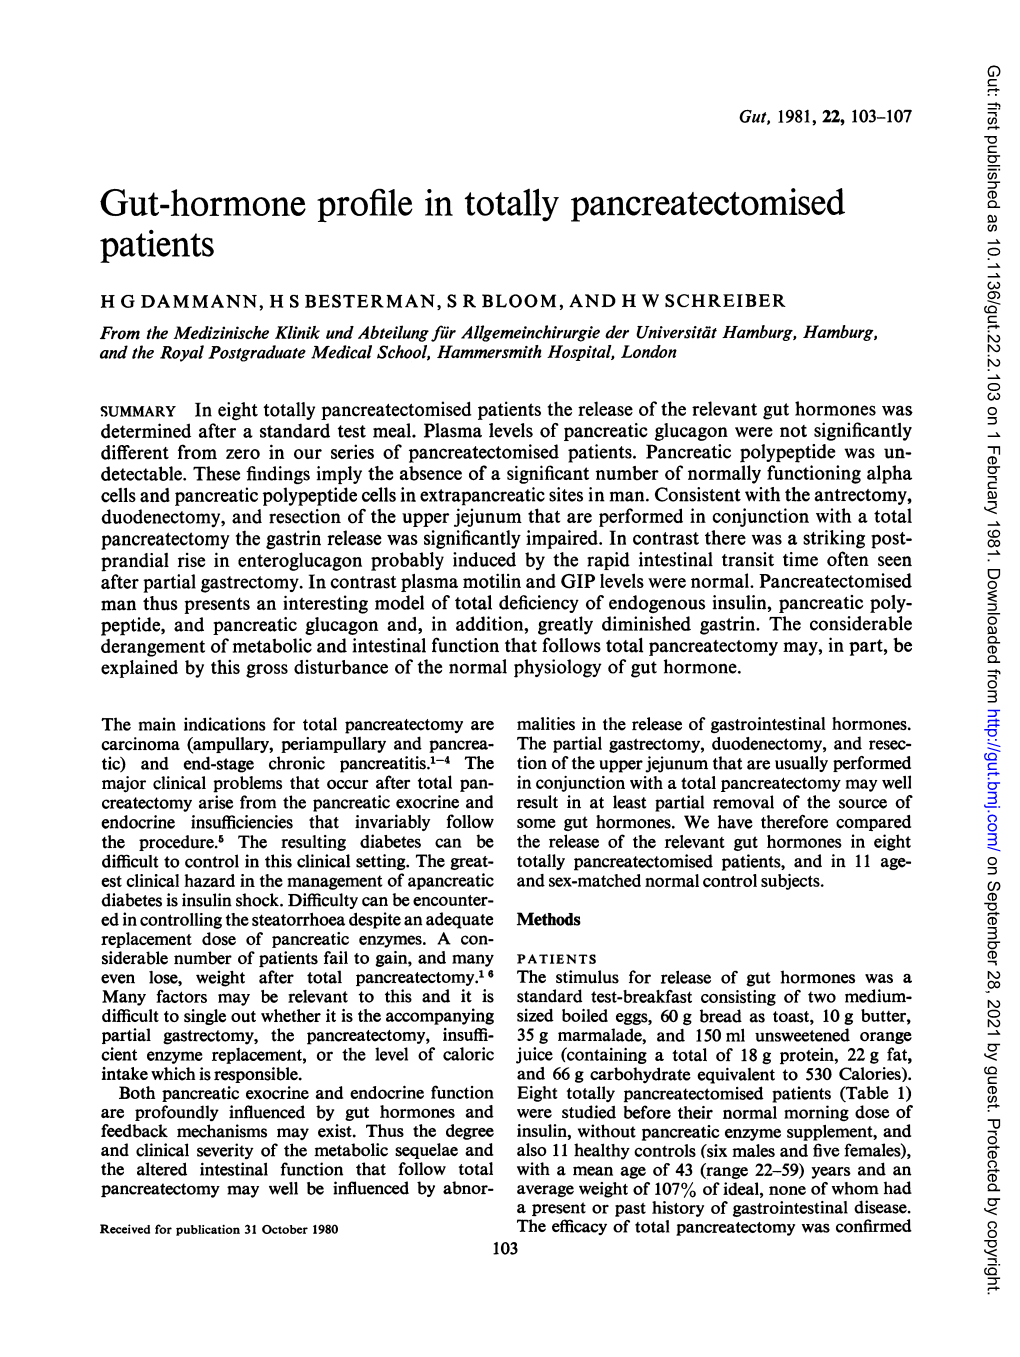 Gut-Hormone Profile in Totally Pancreatectomised Patients